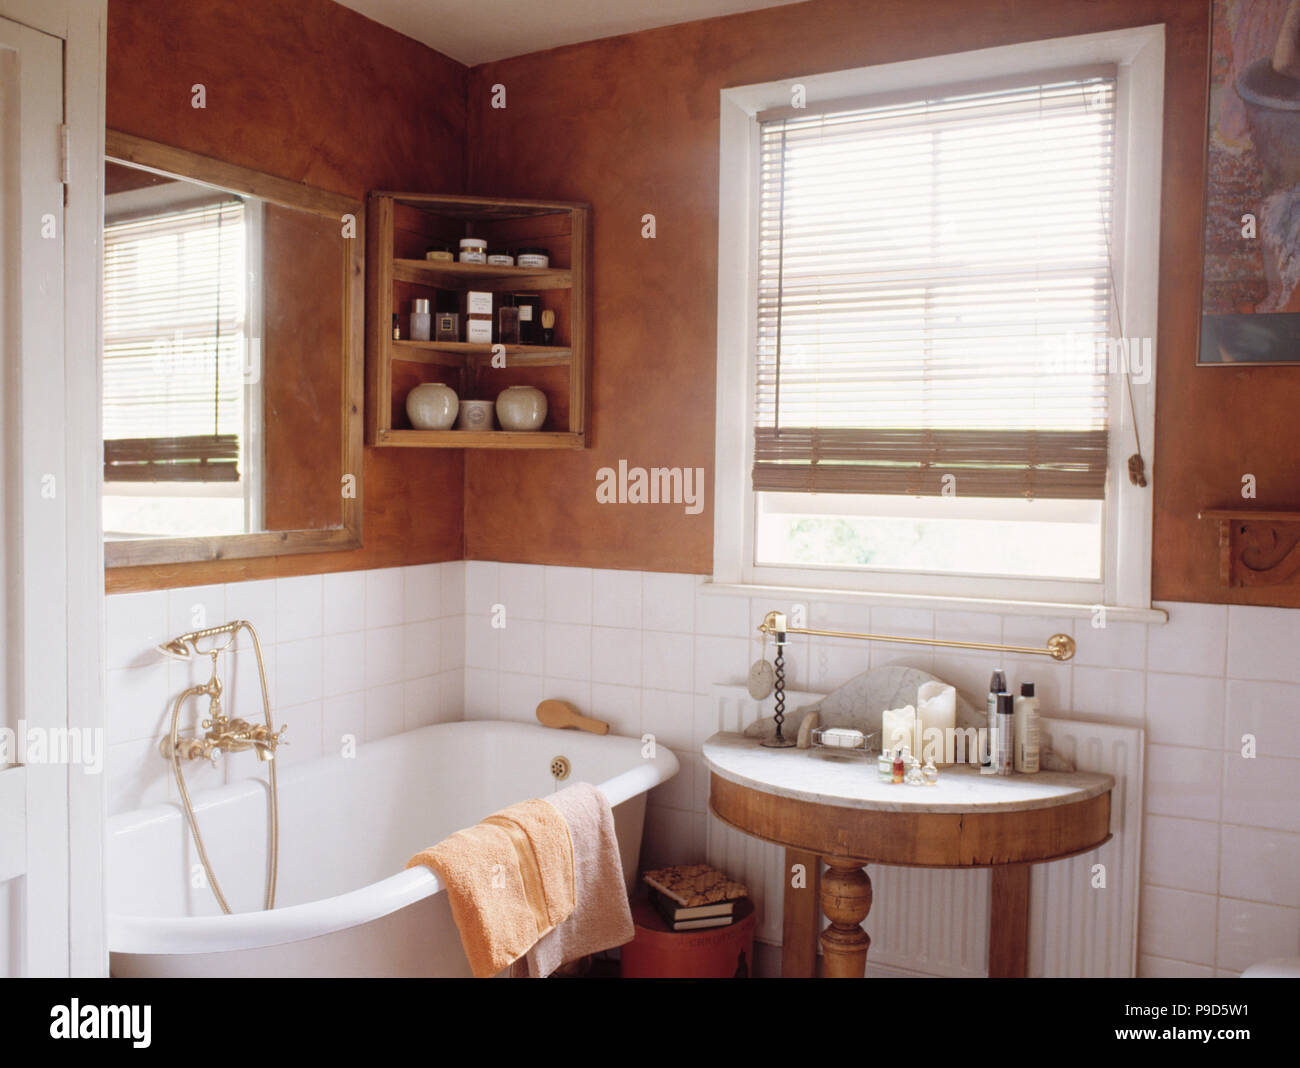 Brown sponge-effect walls above white tiles in bathroom with rolltop bath and small marble-topped antique table Stock Photo